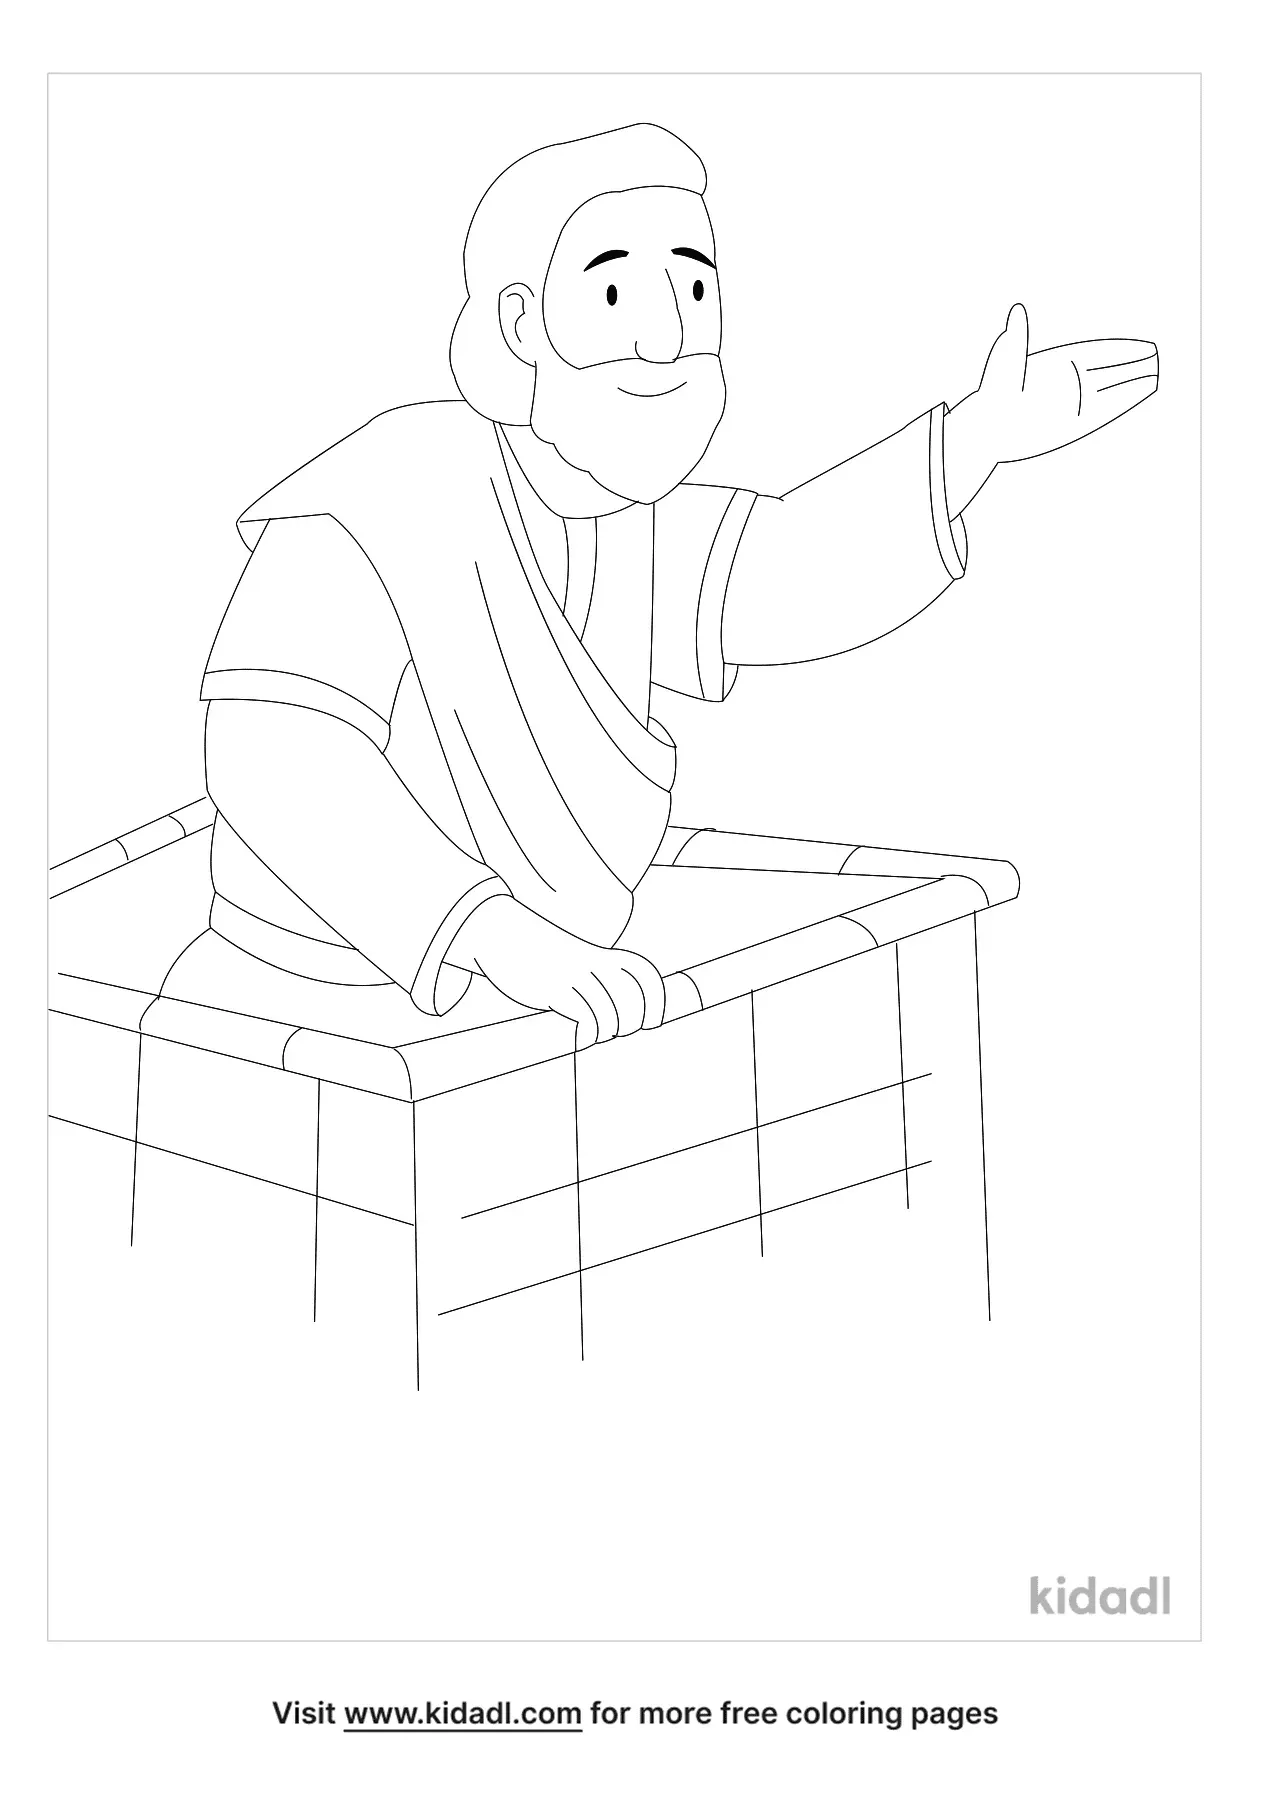 Psalm 91 Coloring Page | Free Bible Coloring Page | Kidadl